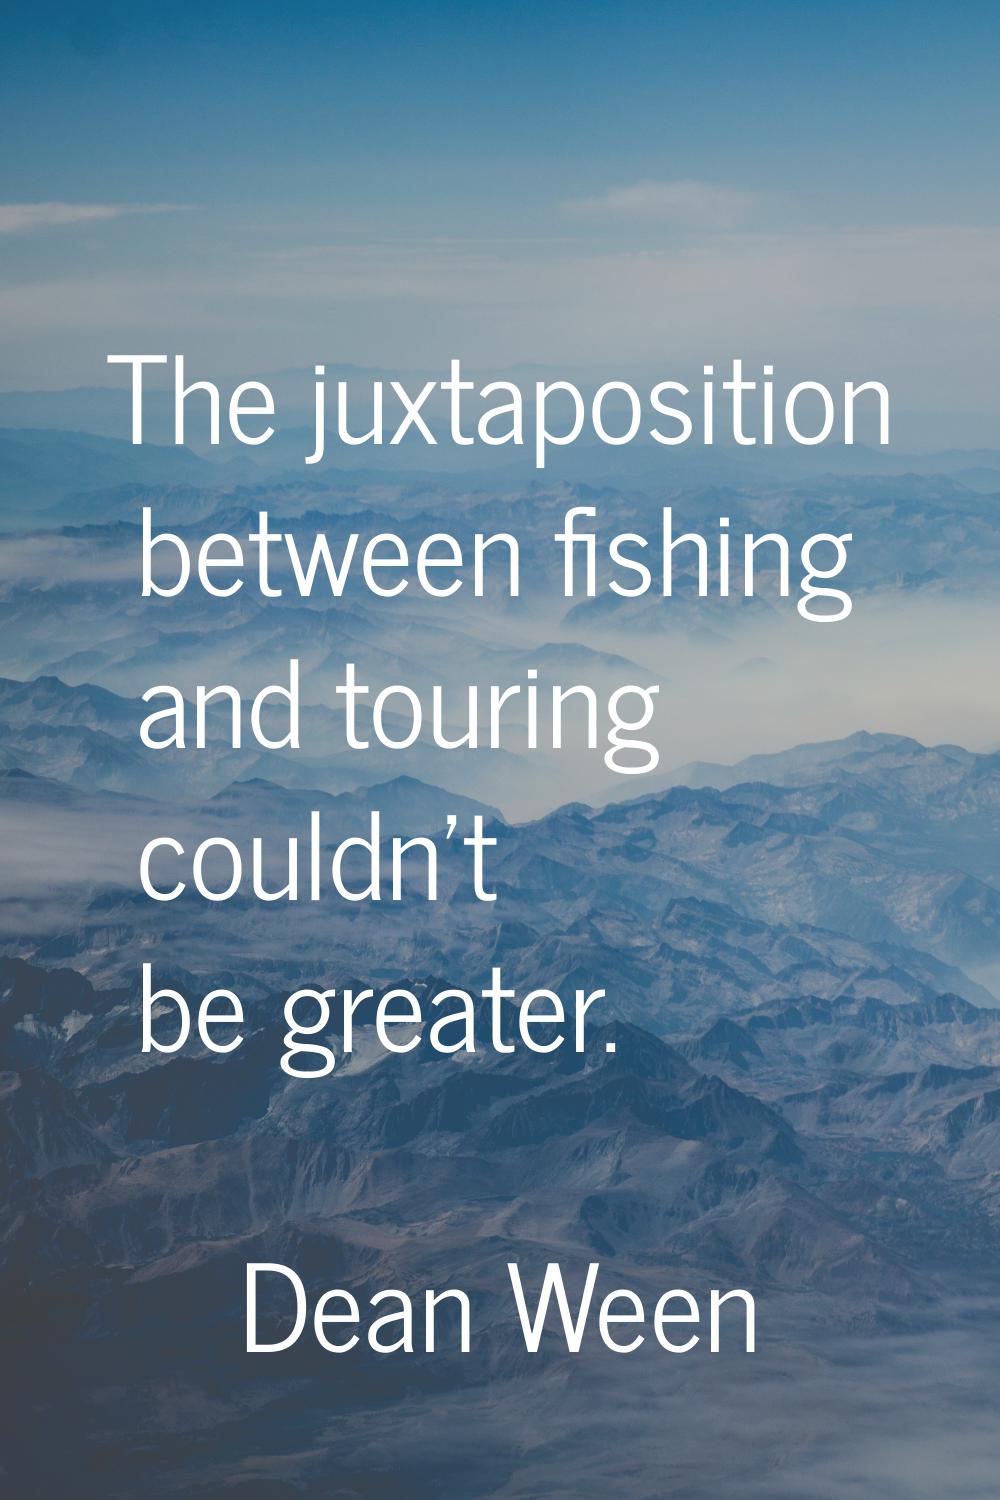 The juxtaposition between fishing and touring couldn't be greater.